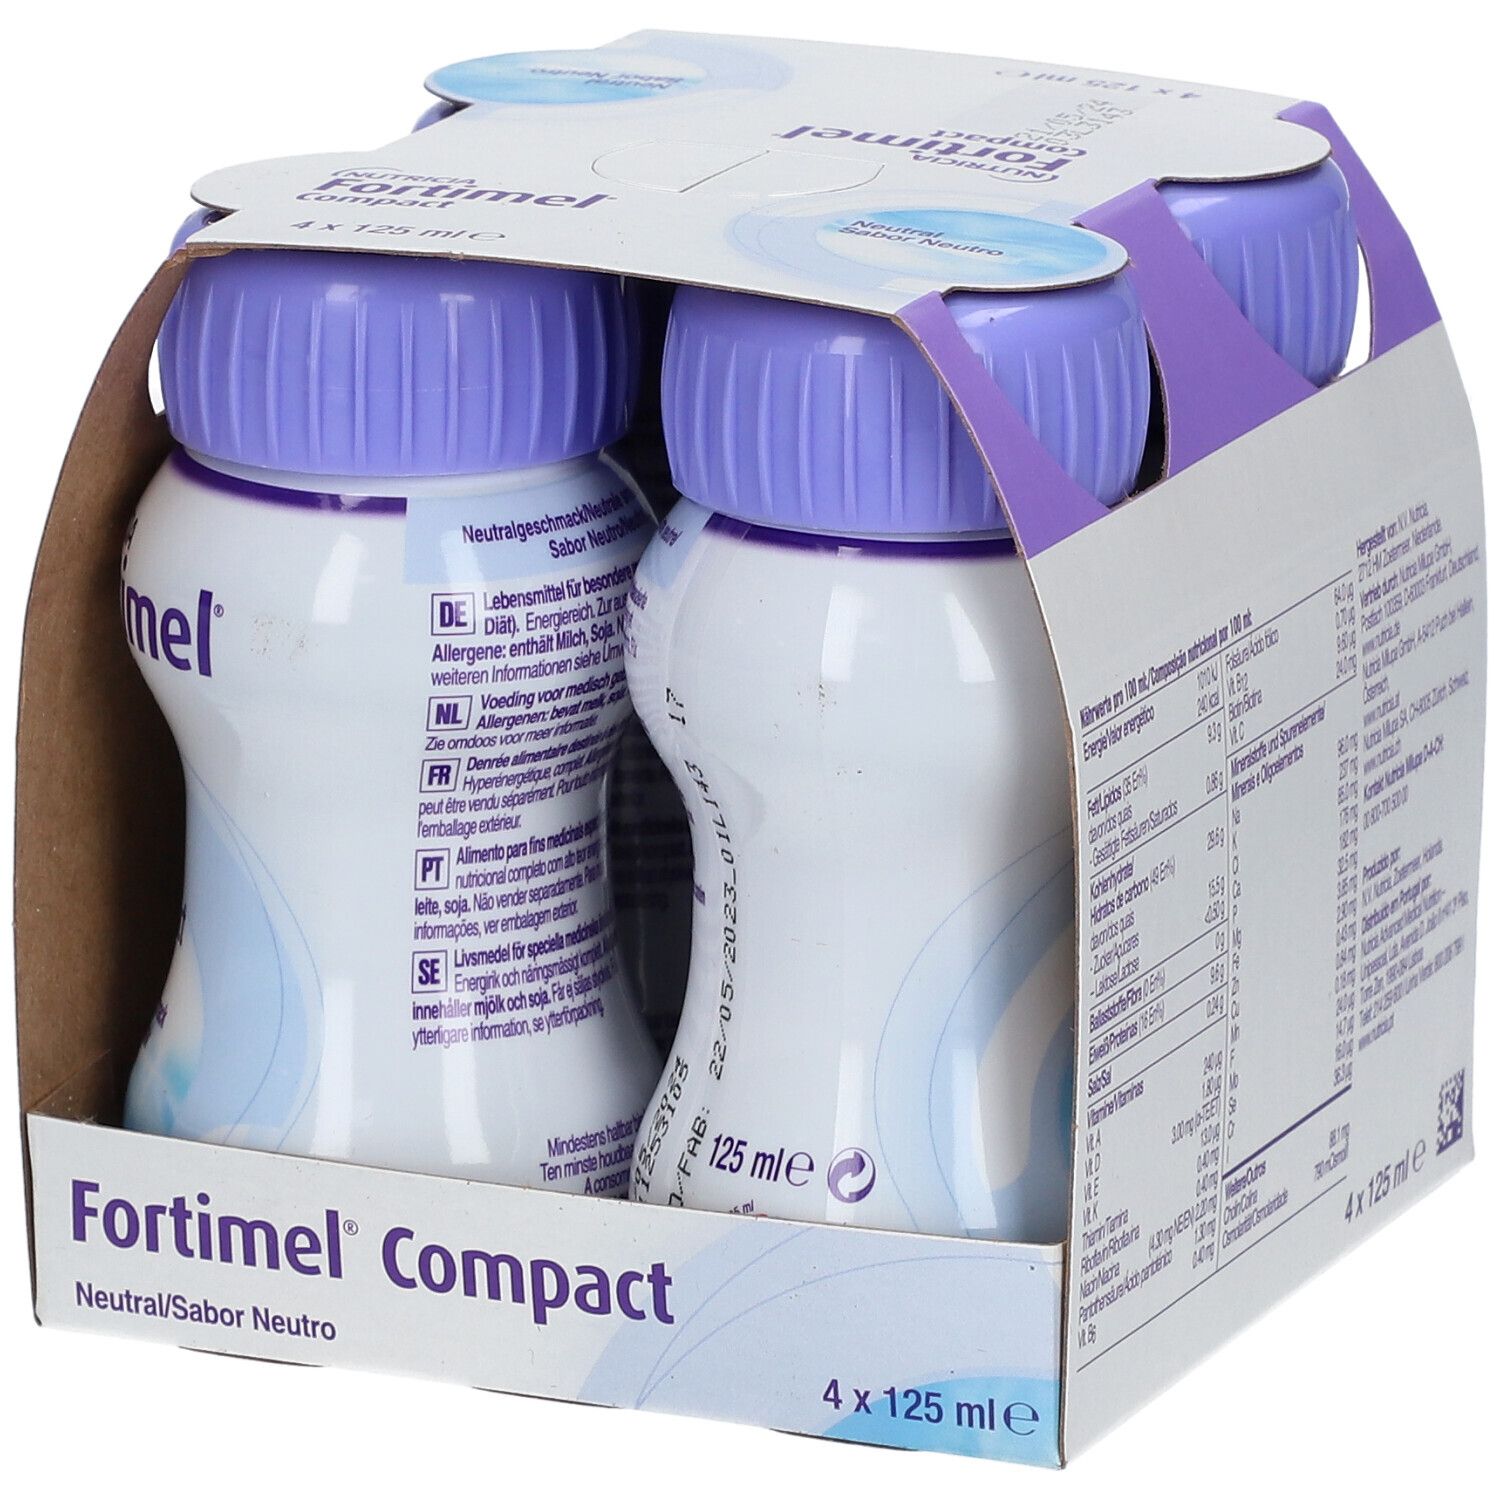 Fortimel® Compact 2.4 Trinknahrung Neutral